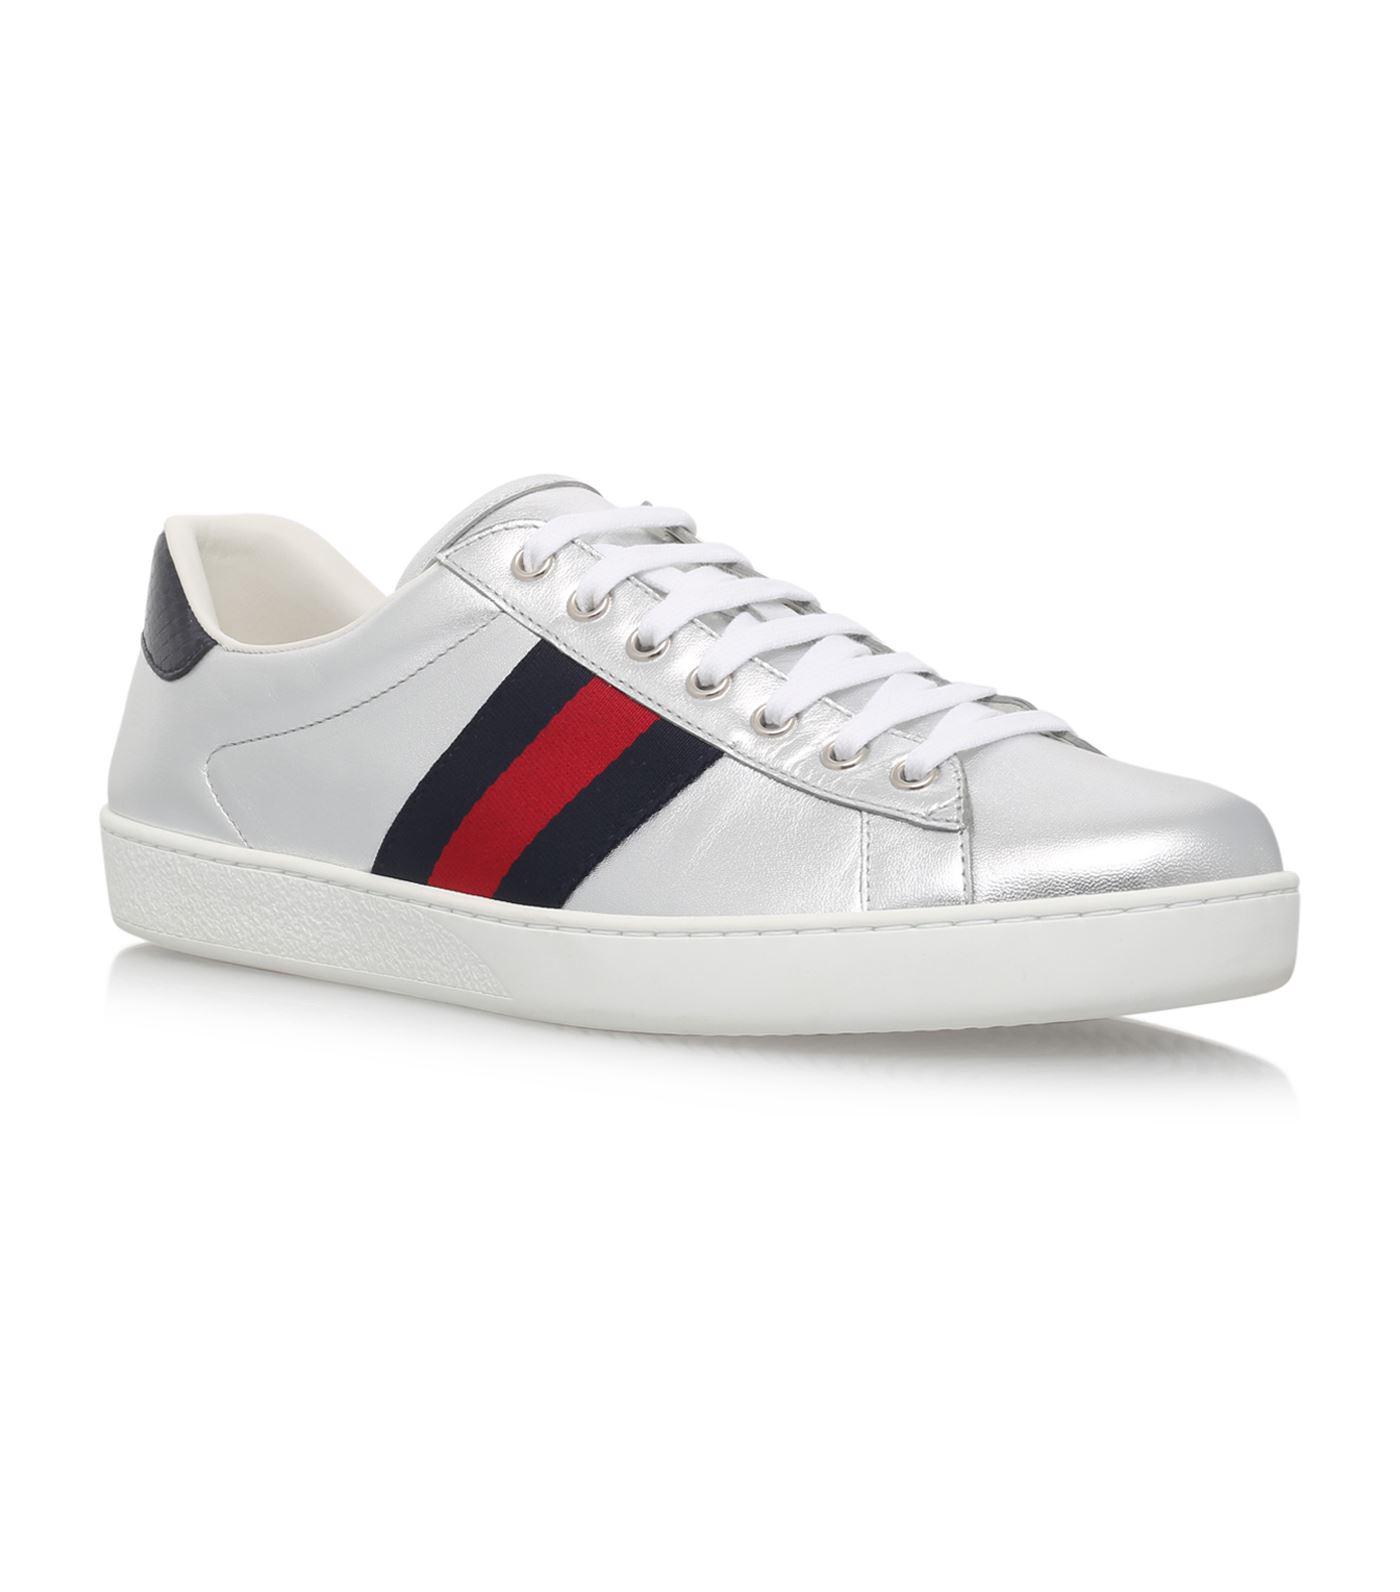 Lyst - Gucci New Ace Metallic Sneakers